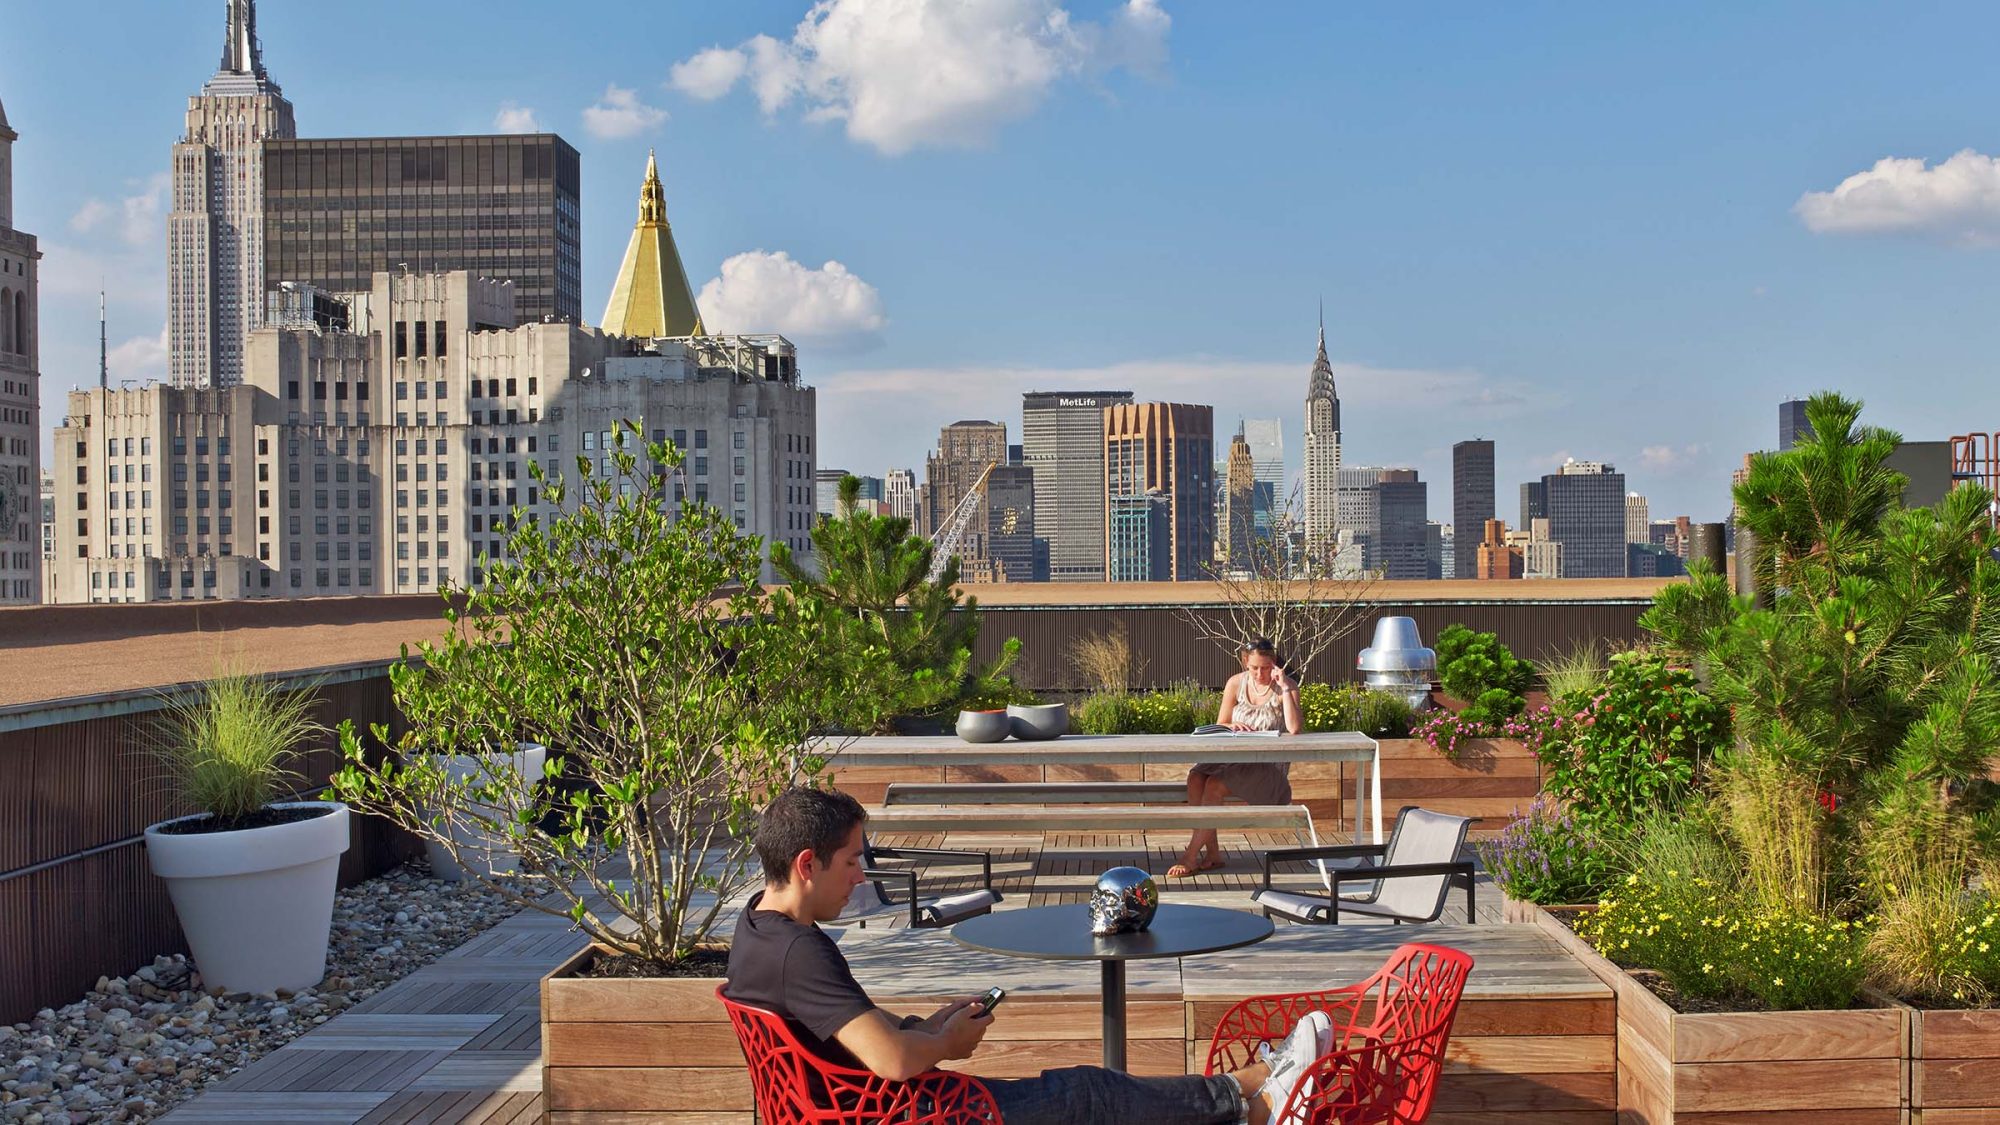 Outdoor work setting designed by M Moser in New York City.